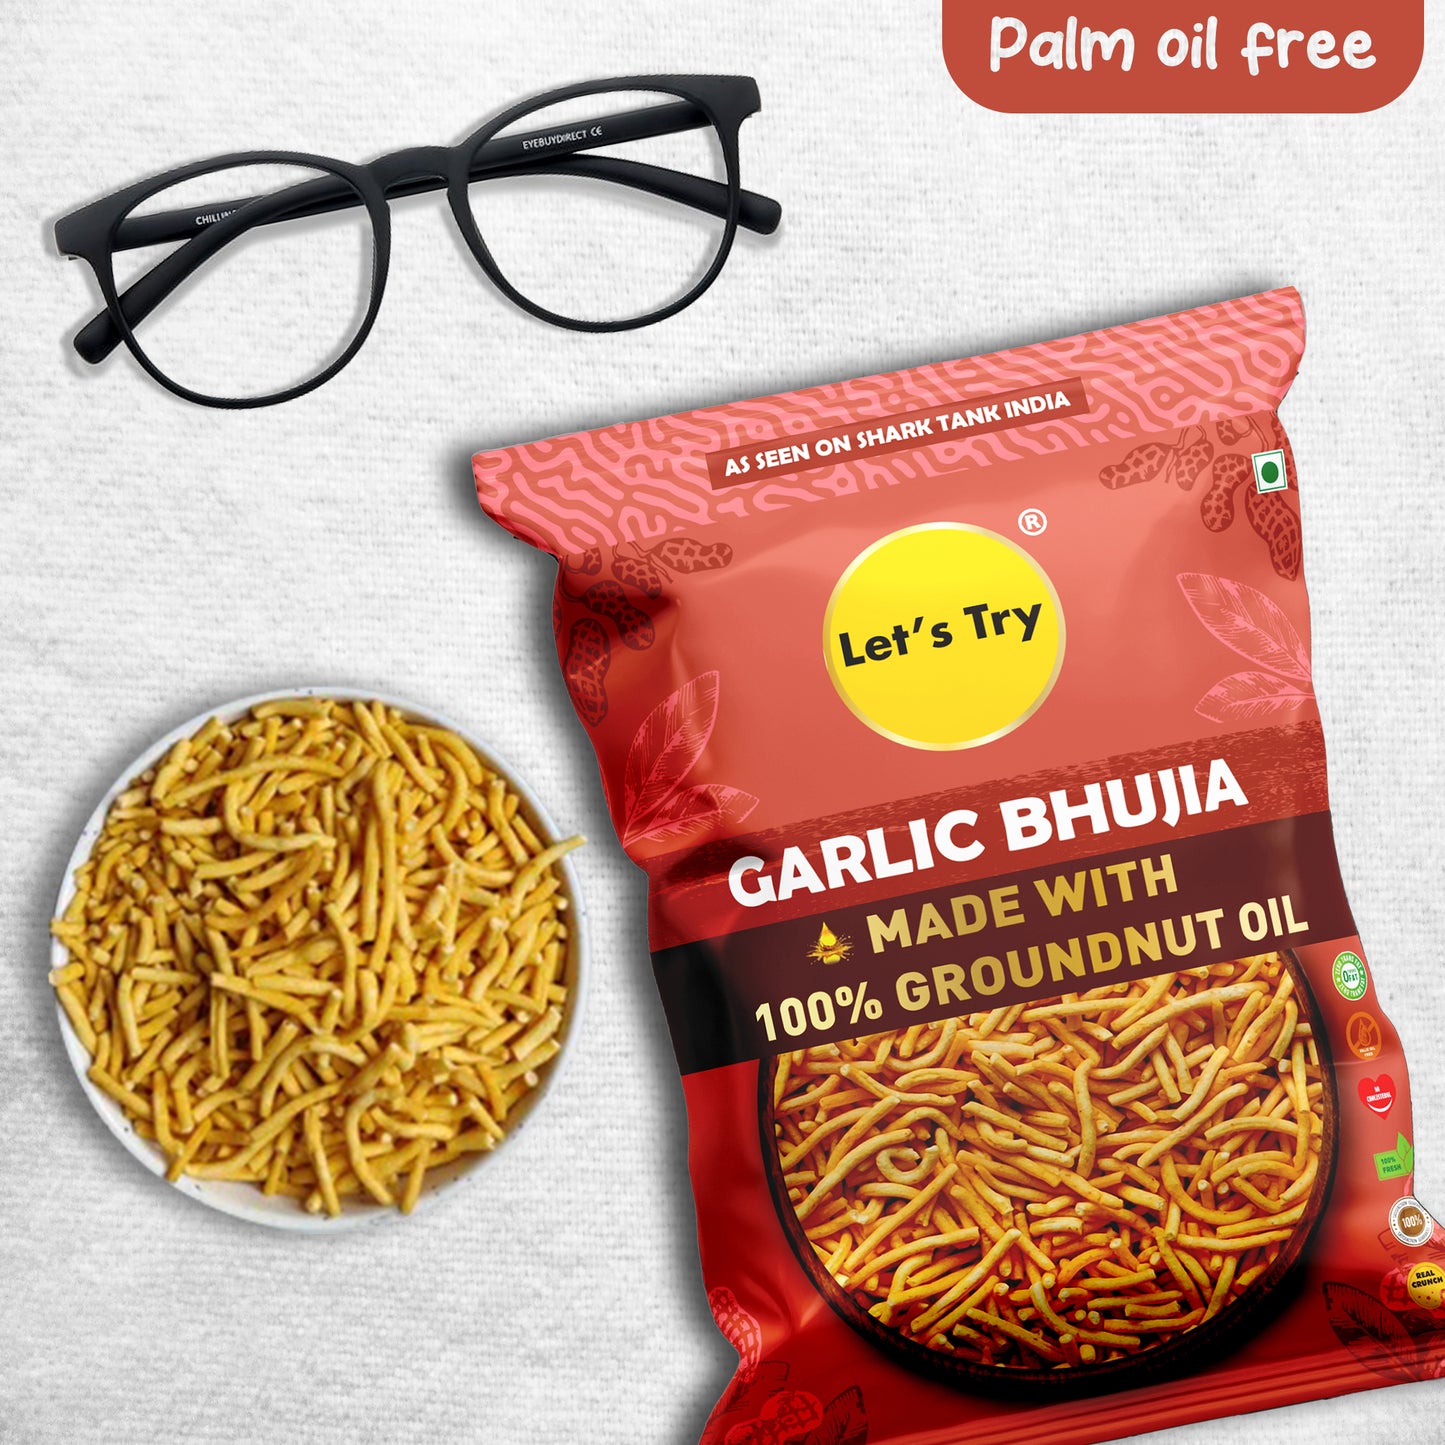 this is Let's Try Garlic Bhujia. Garlic Bhujia is a popular Indian snack made from thin strips of gram flour with the addition of garlic and spices, which are deep-fried until crispy. Let's Try Garlic Bhujia is made with 100% groundnut oil and is free of palm oil. This makes it a healthier option as groundnut oil is a healthier oil compared to palm oil. It is commonly eaten as a snack or as a topping for chaat dishes. The garlic addition gives it a unique and distinct flavor.